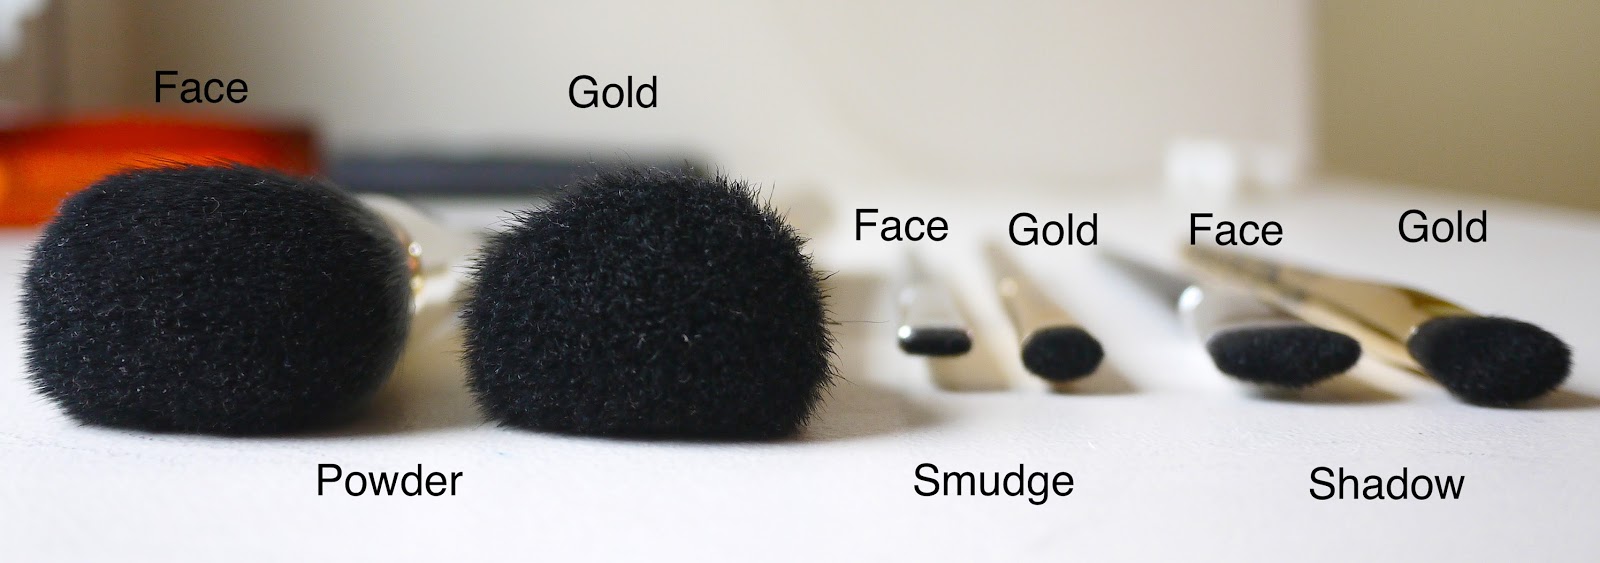 Sephora Face the Day: Full Face Brush Set and Gold Den Brush Set review comparison